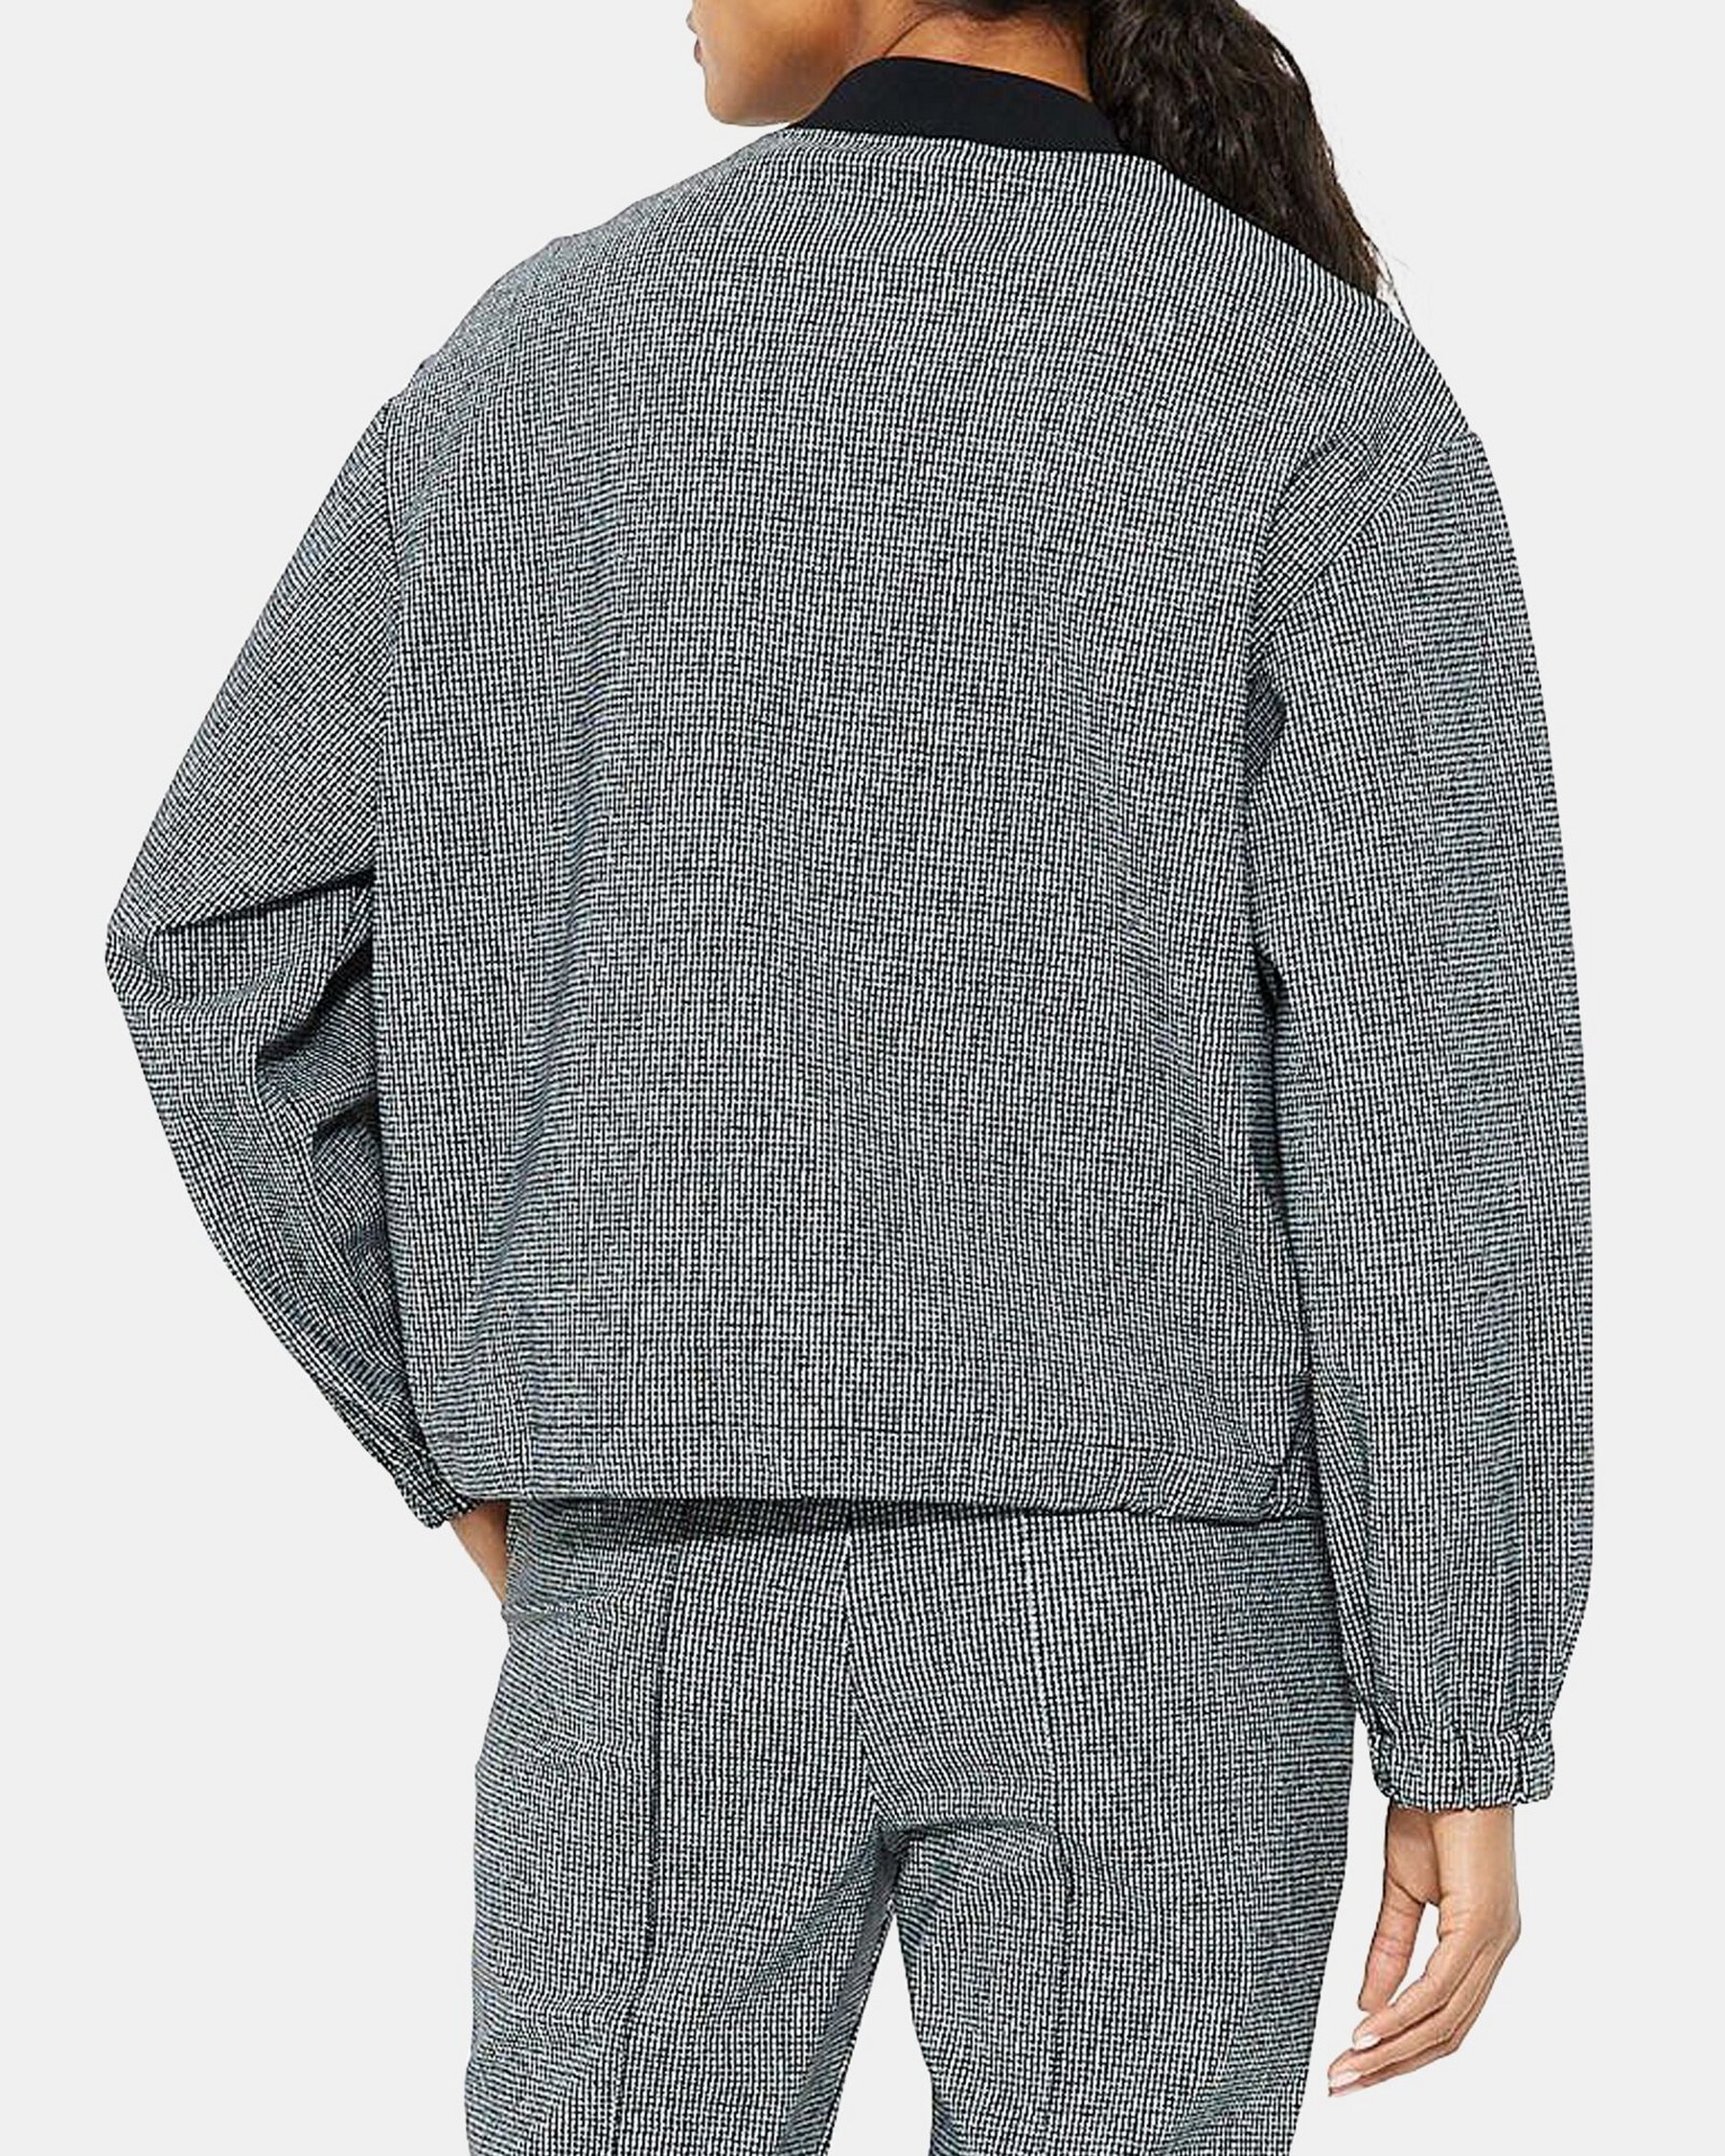 Cropped Anorak in Performance Knit